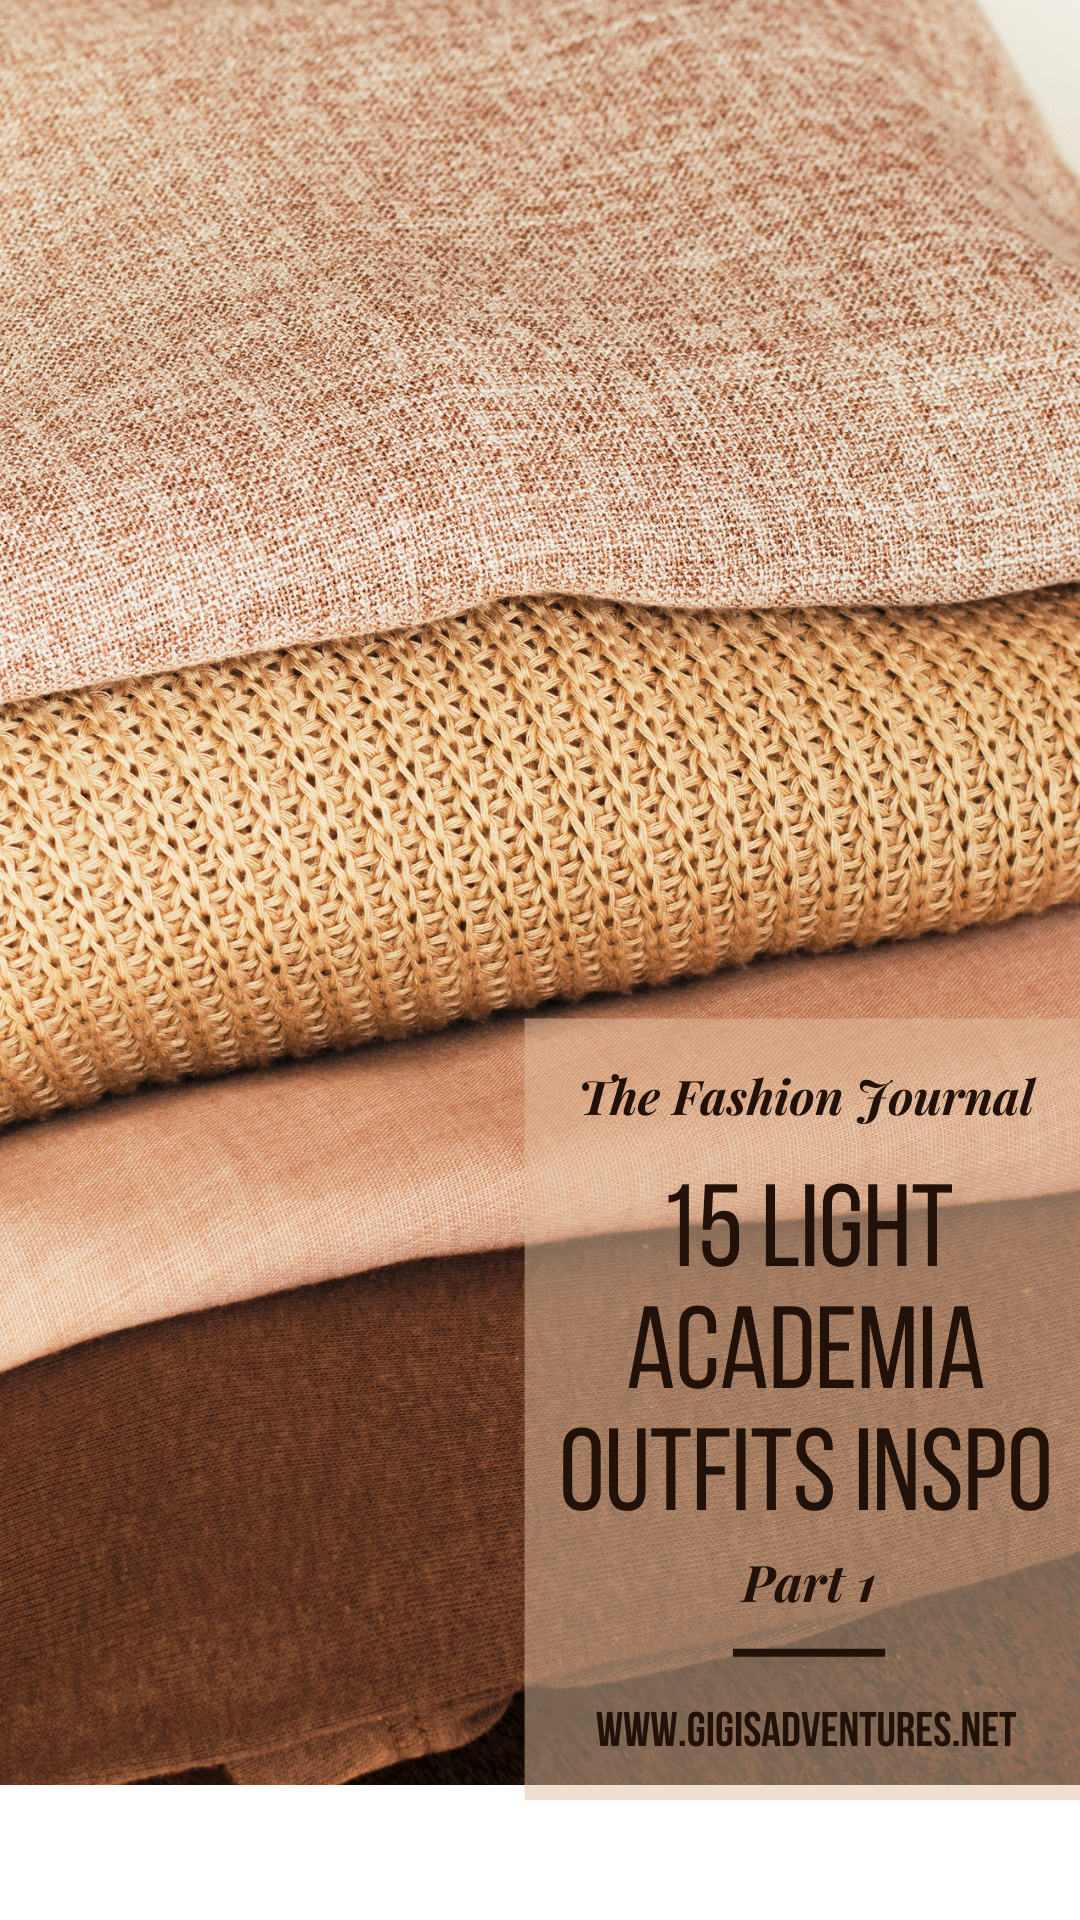 15 Light Academia Outfits Inspiration, Part 1 - The Fashion Journal